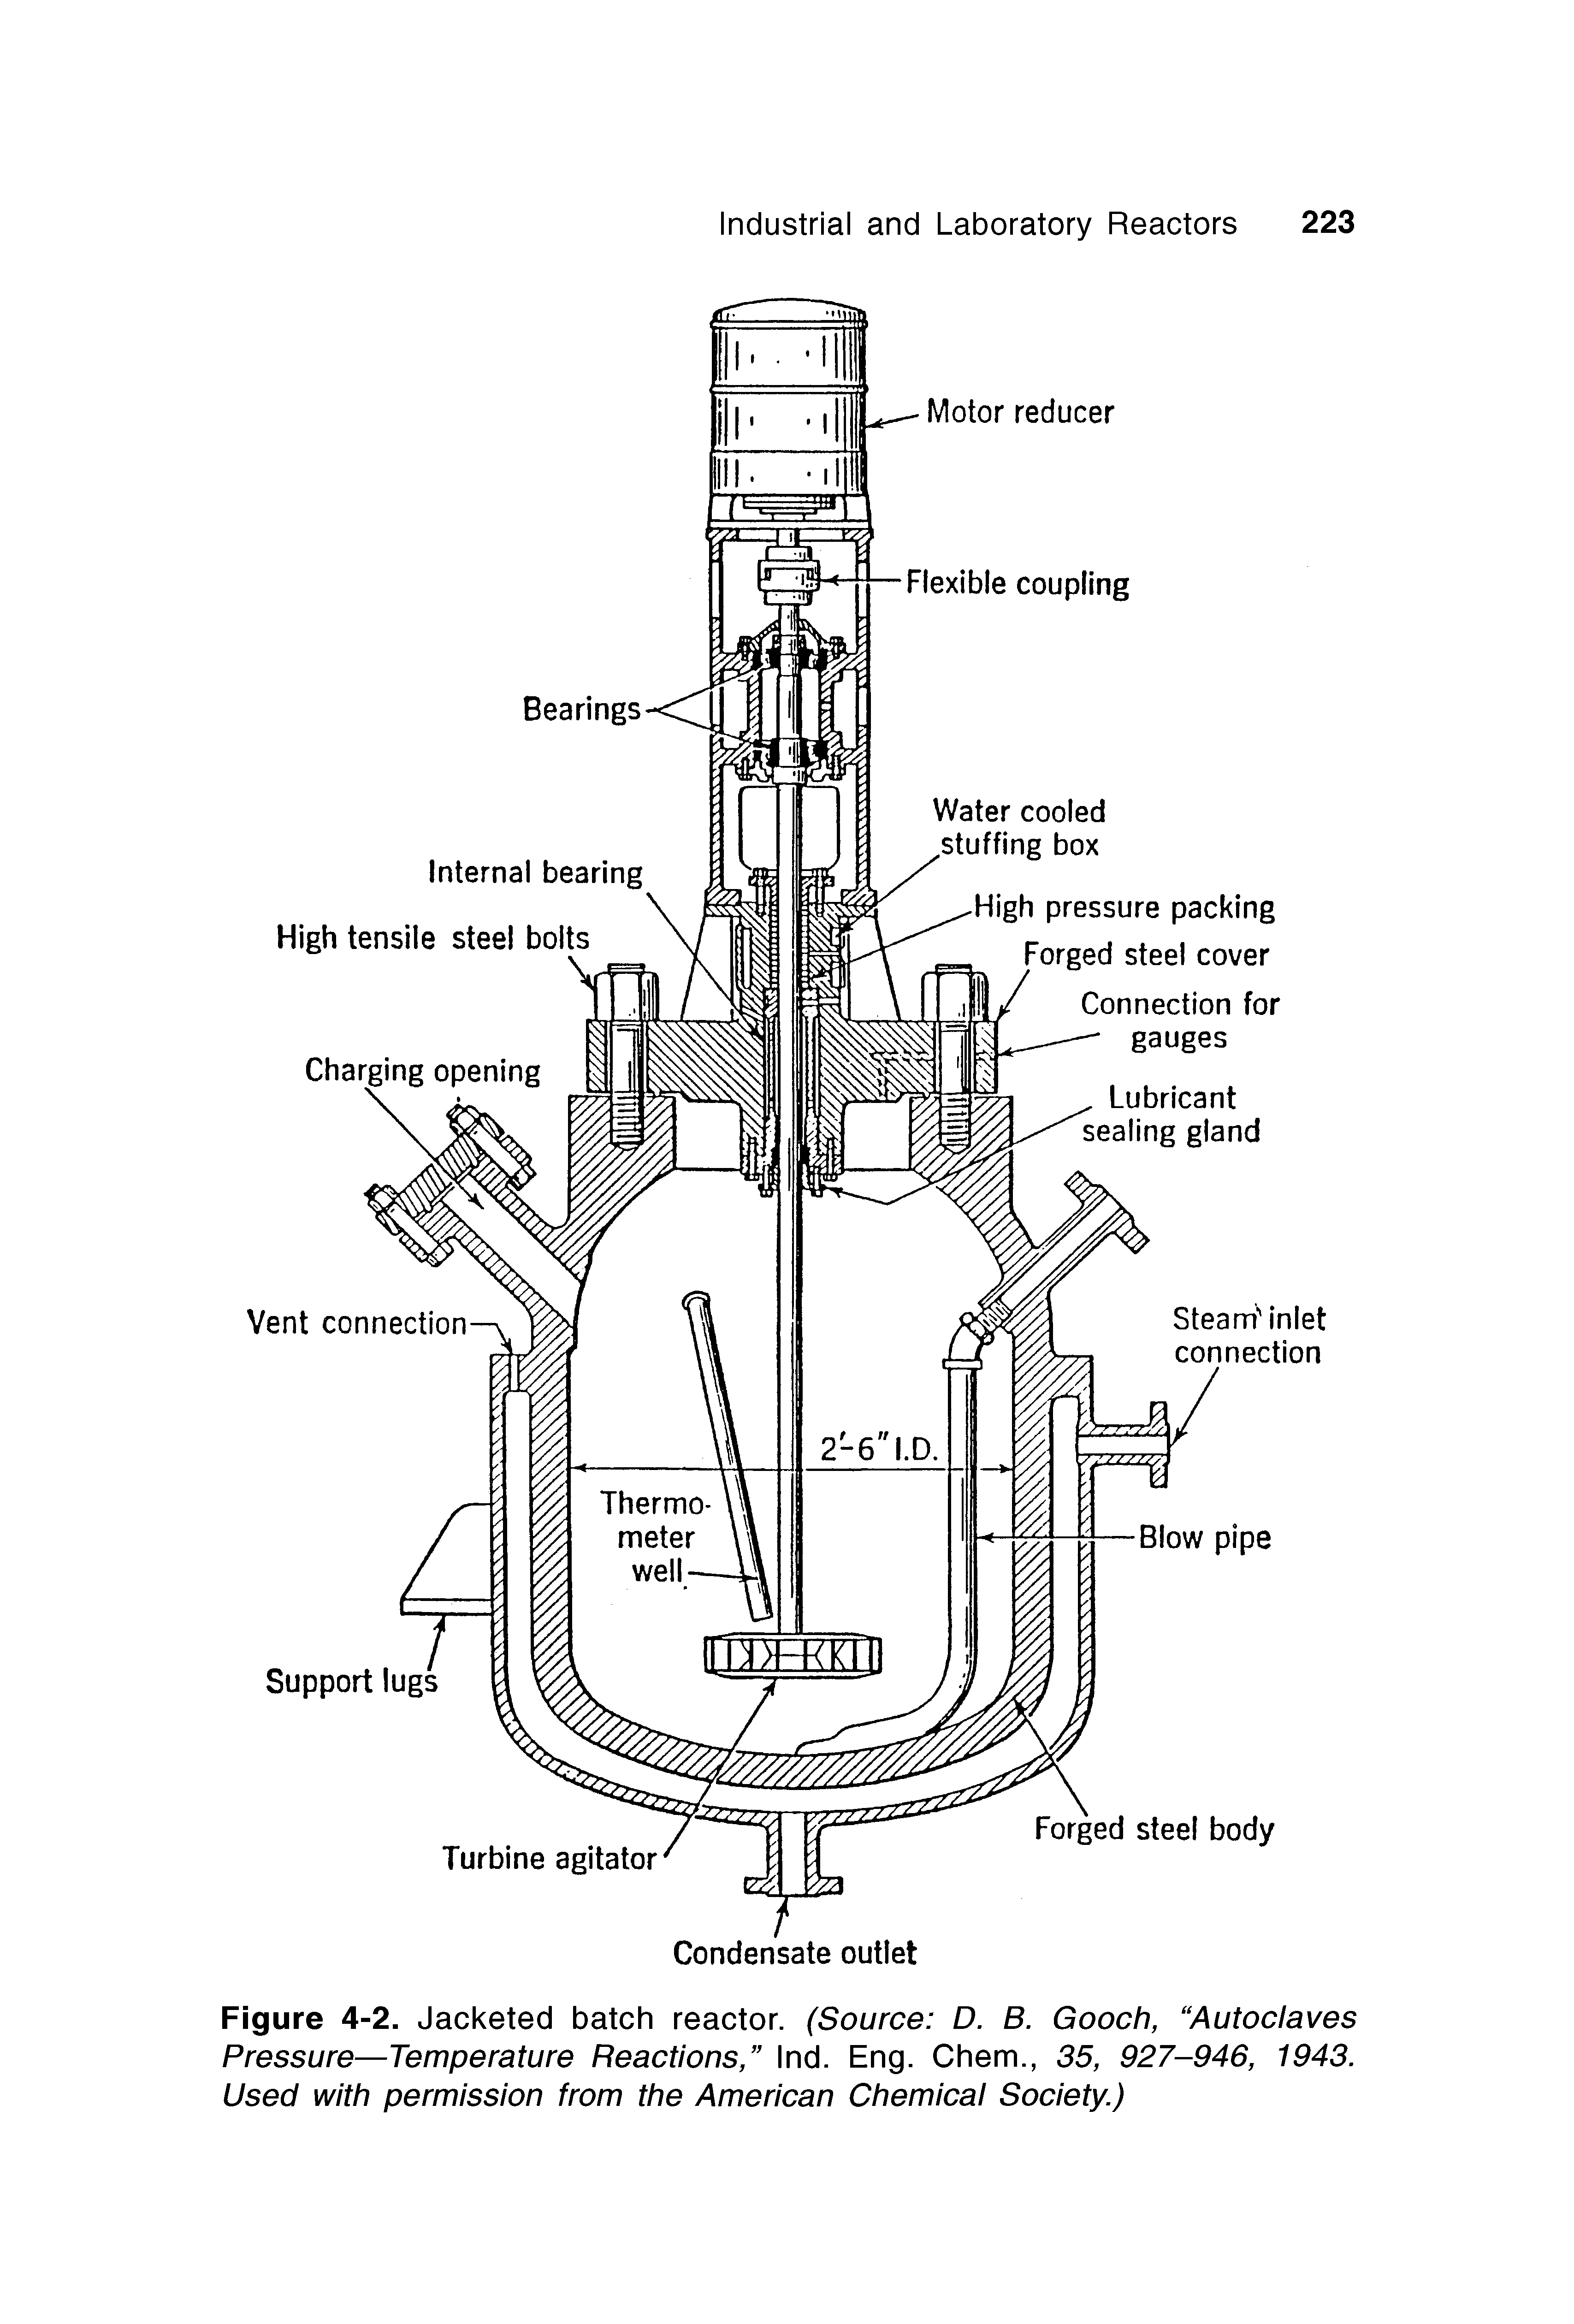 Figure 4-2. Jacketed batch reactor. (Source D. B. Gooch, Autoclaves Pressure—Temperature Reactions, Ind. Eng. Chem., 35, 927-946, 1943. Used with permission from the American Chemical Society.)...